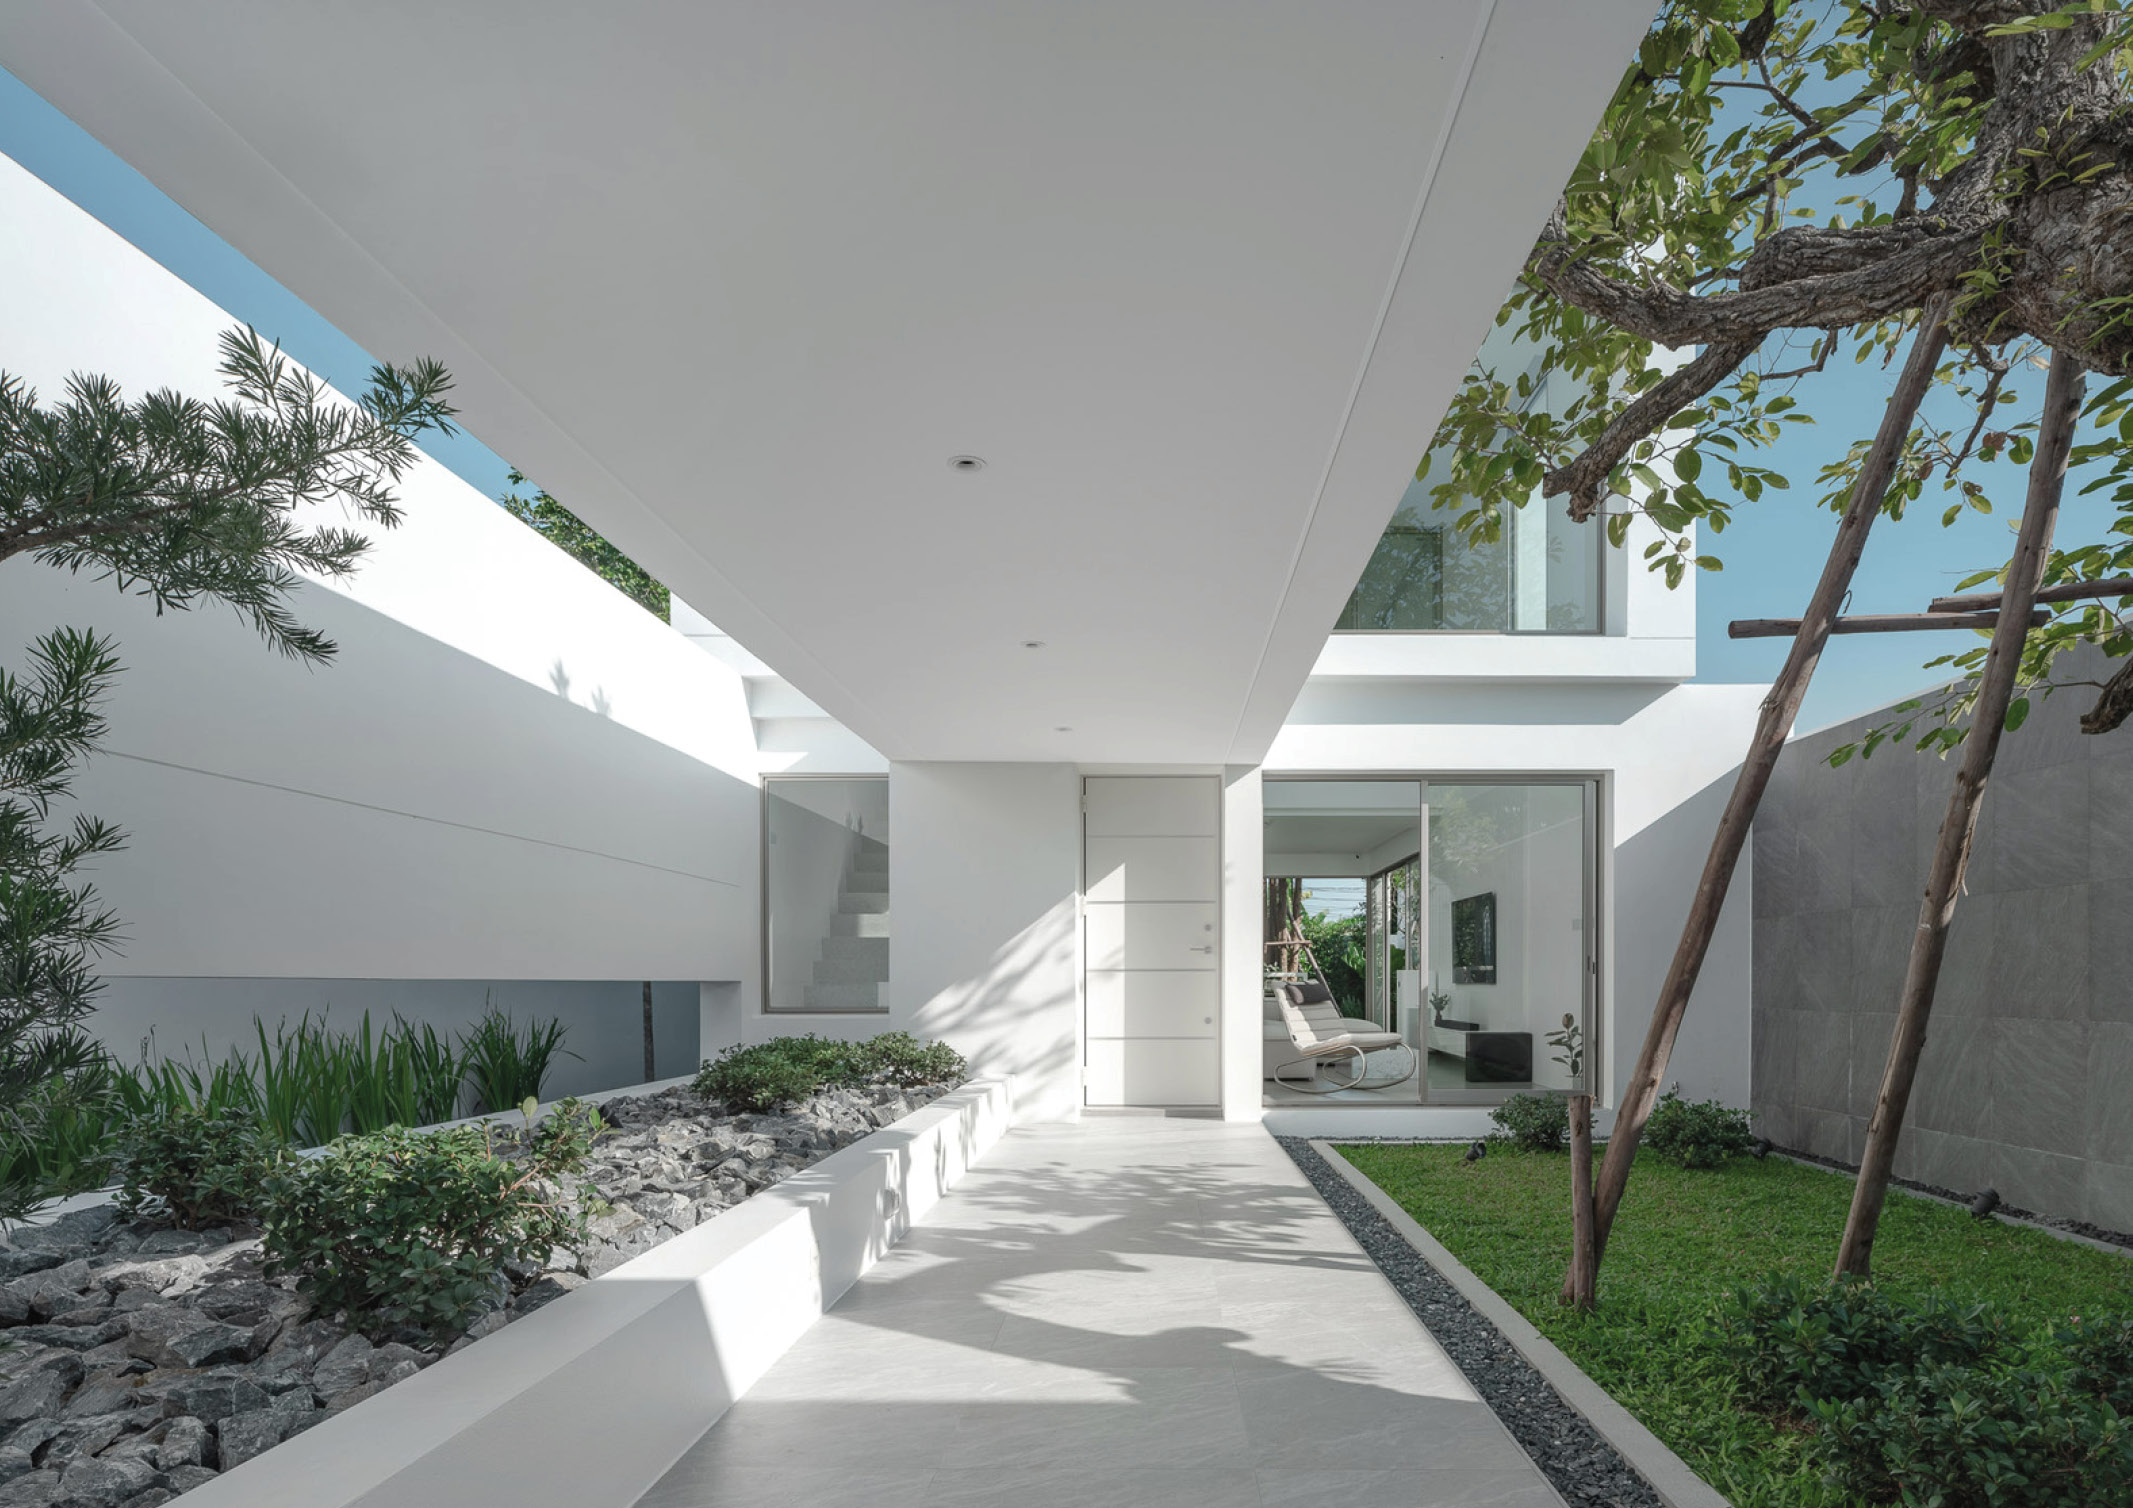 House C + I in Chiang Mai, Thailand Designed by Blank Studio